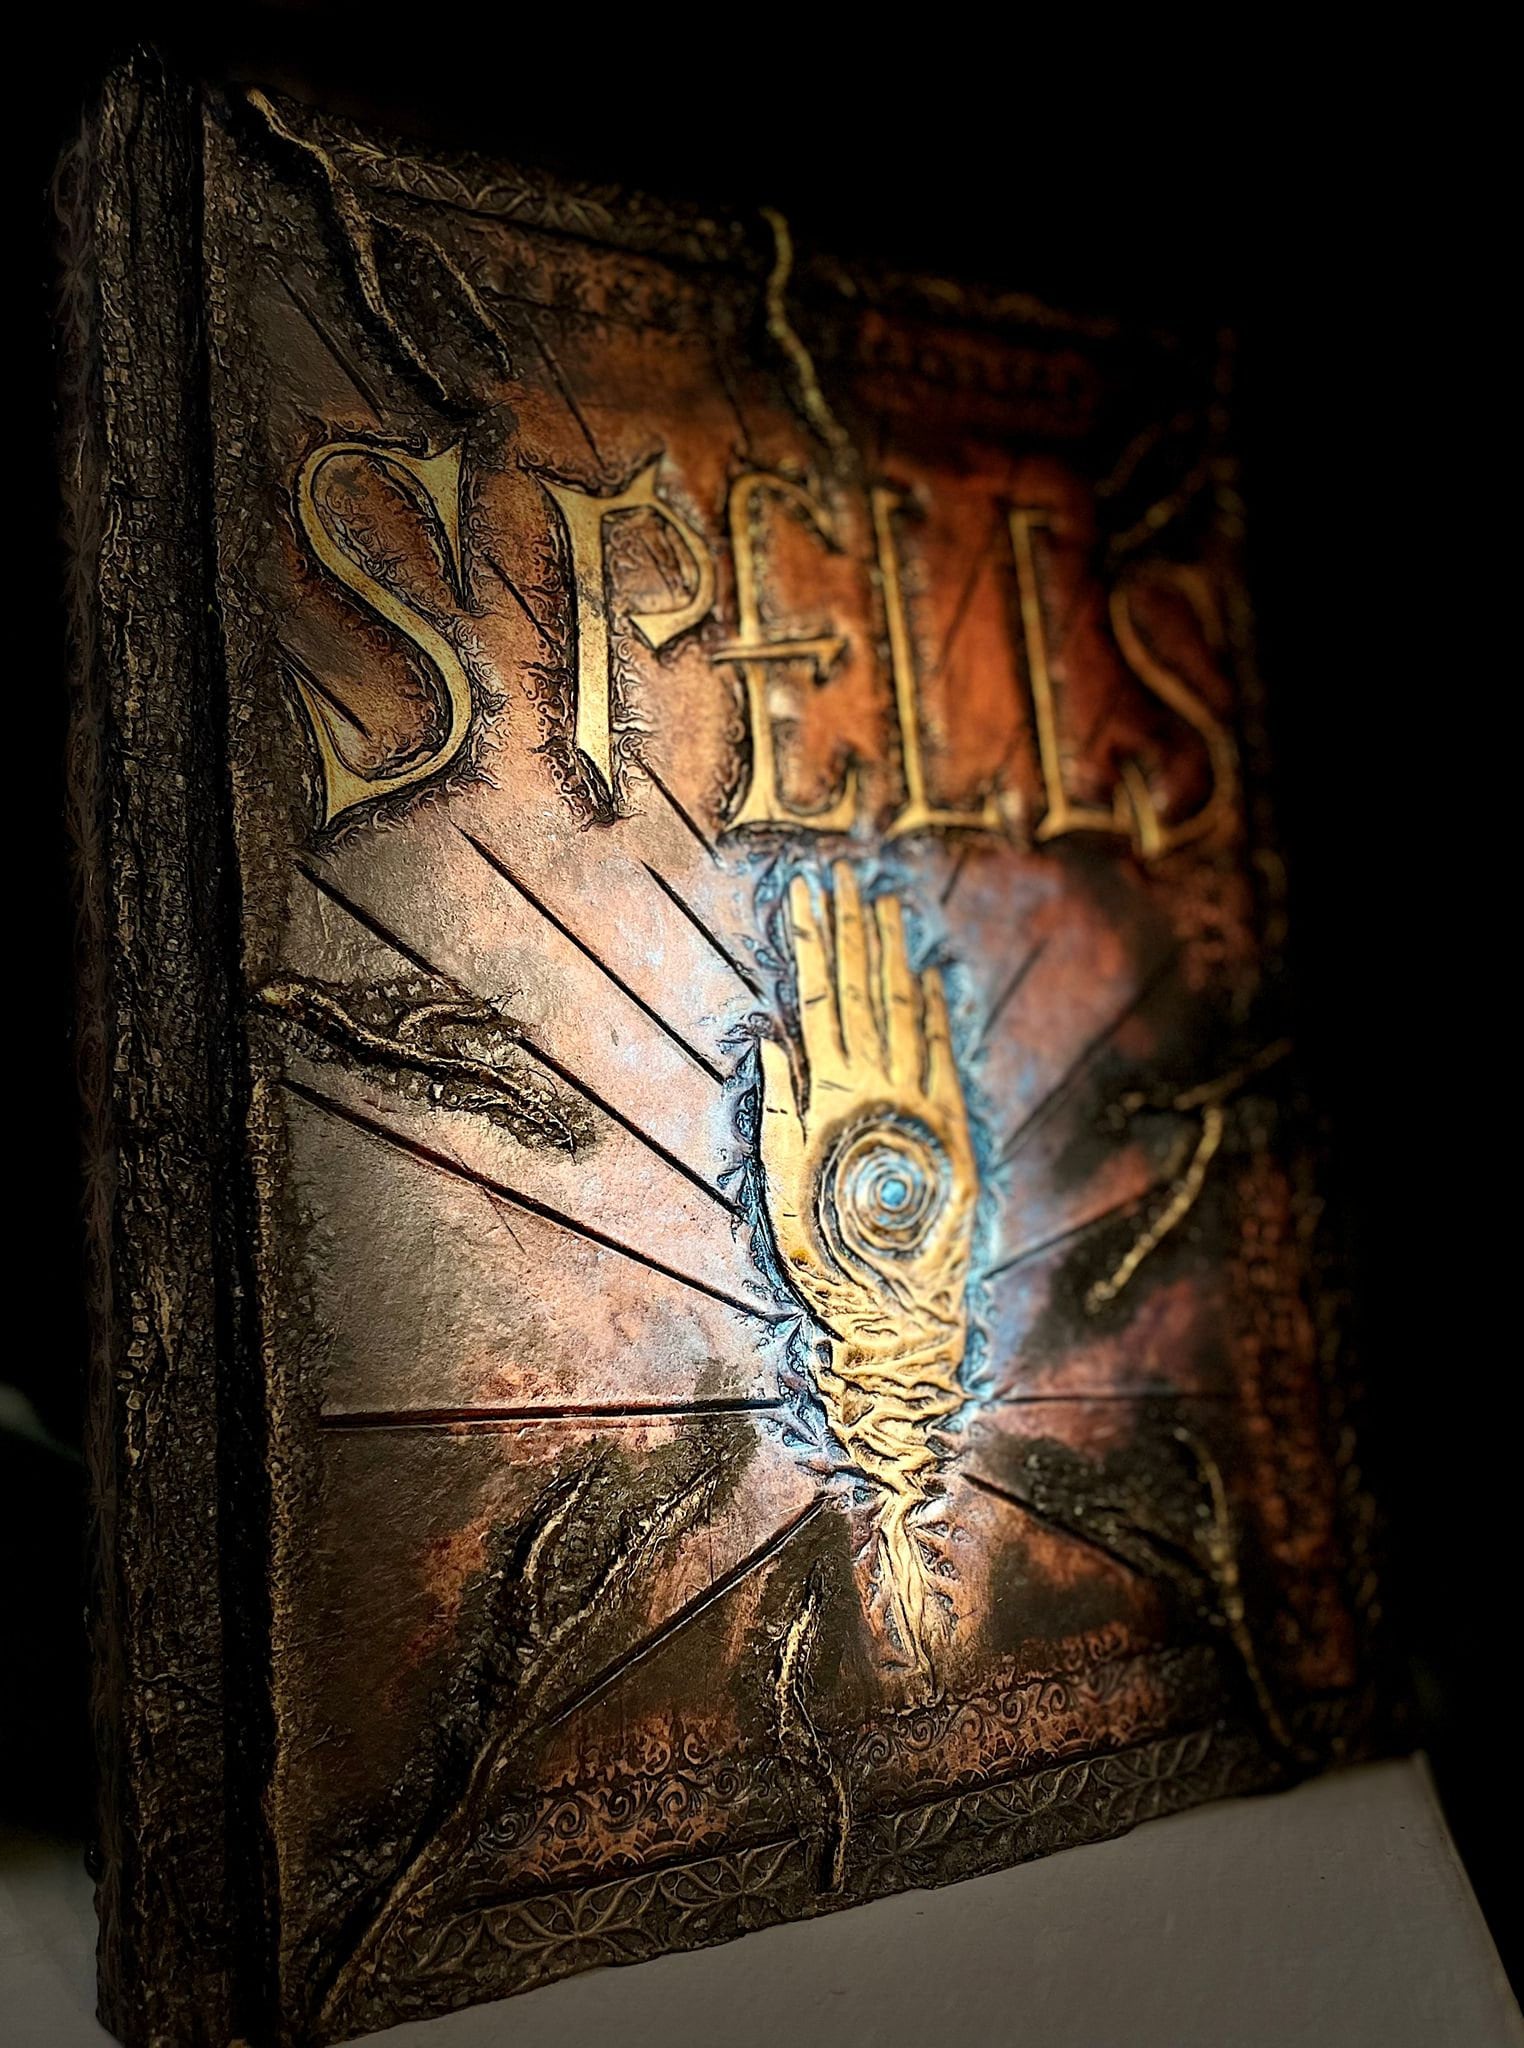 Witches Spell Book aged printed book pages, Halloween Prop by Dead Head  Props